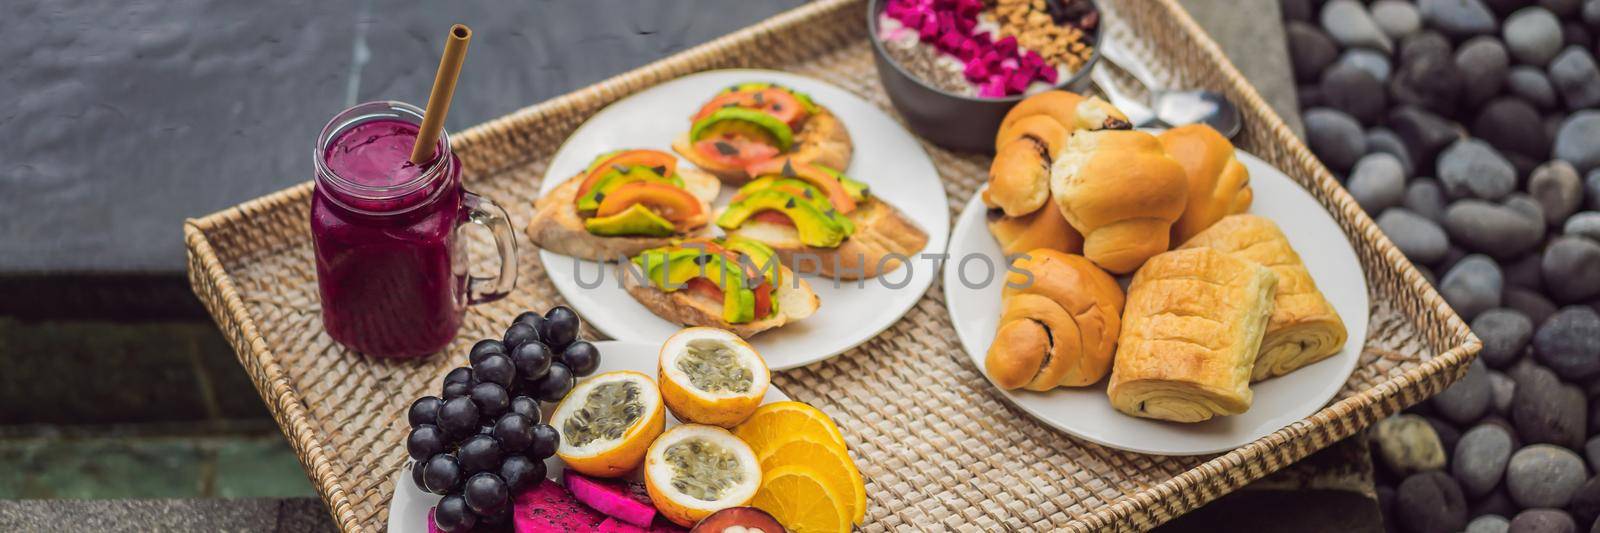 Breakfast on a tray with fruit, buns, avocado sandwiches, smoothie bowl by the pool. Summer healthy diet, vegan breakfast. Tasty vacation concept BANNER, LONG FORMAT by galitskaya